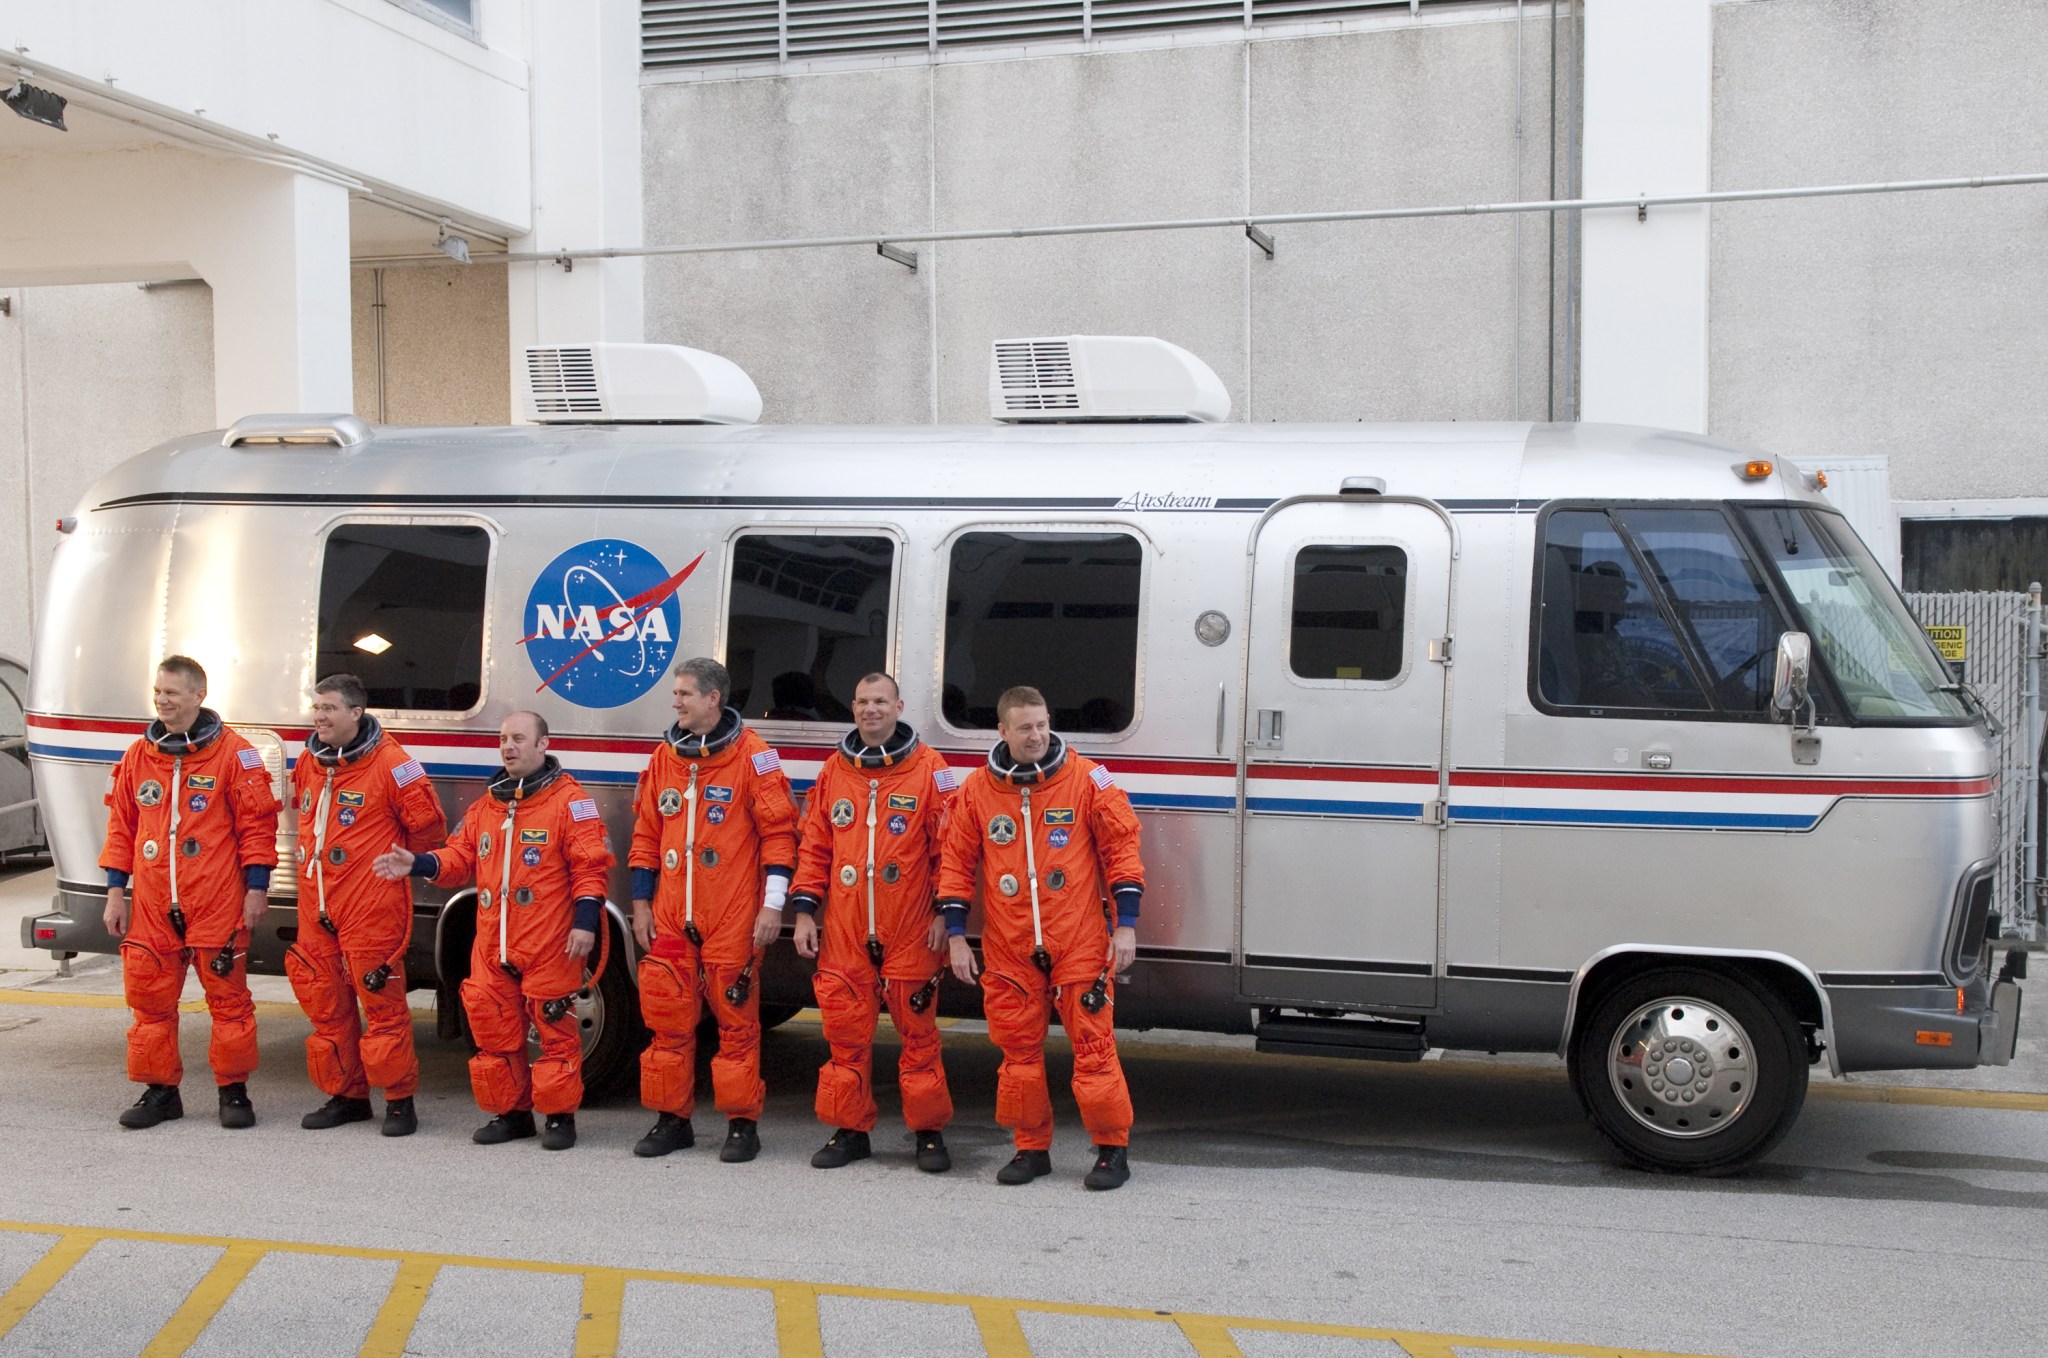 The crew of shuttle Atlantis' STS-132 mission poses for a group portrait in front of the Astrovan.